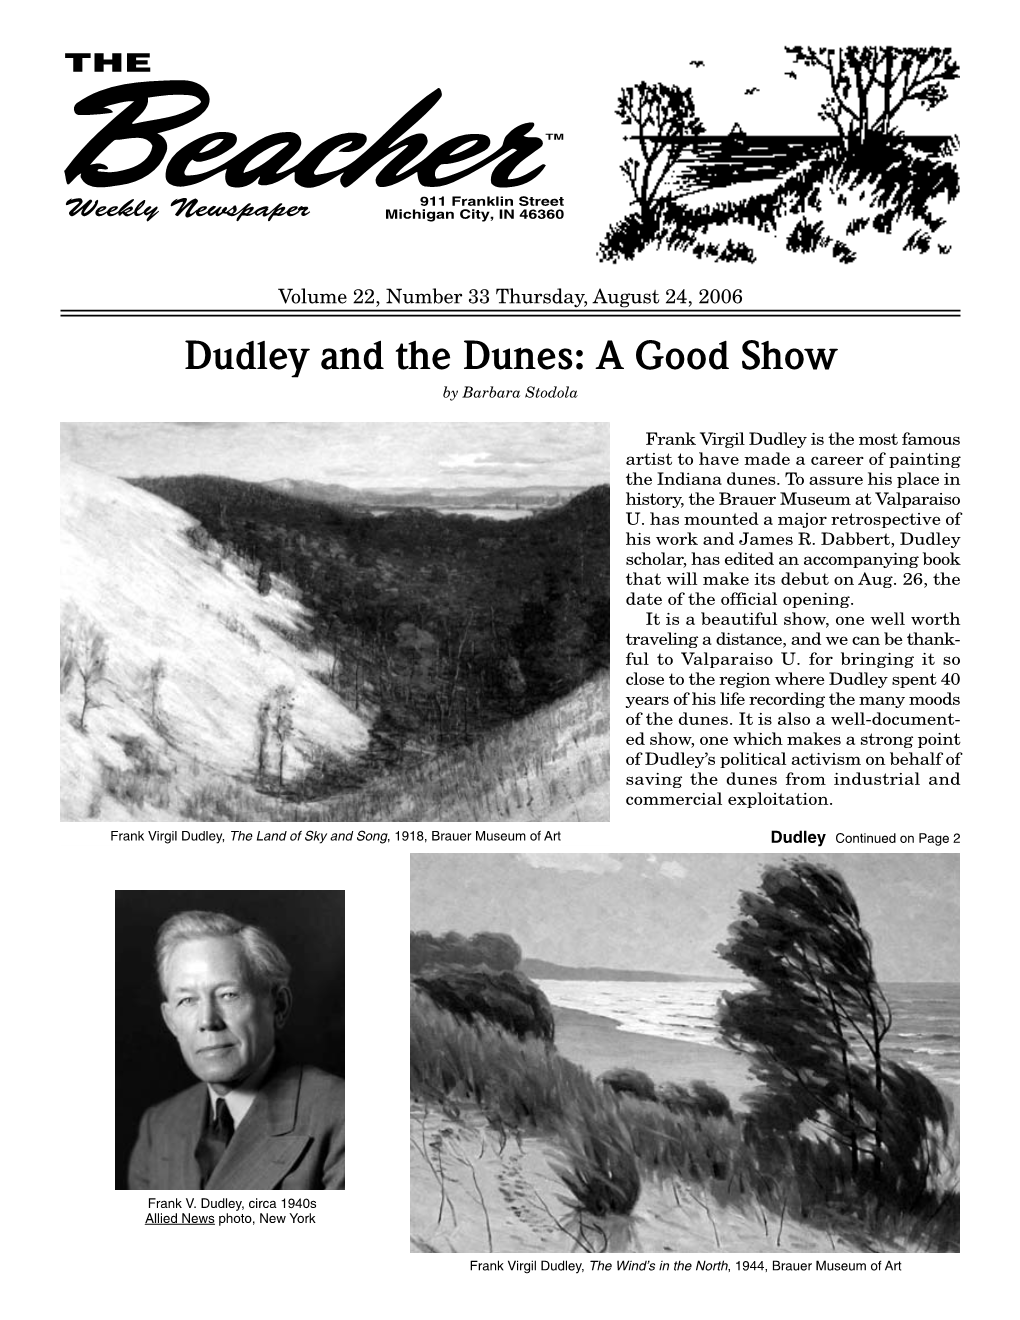 Dudley and the Dunes: a Good Show by Barbara Stodola